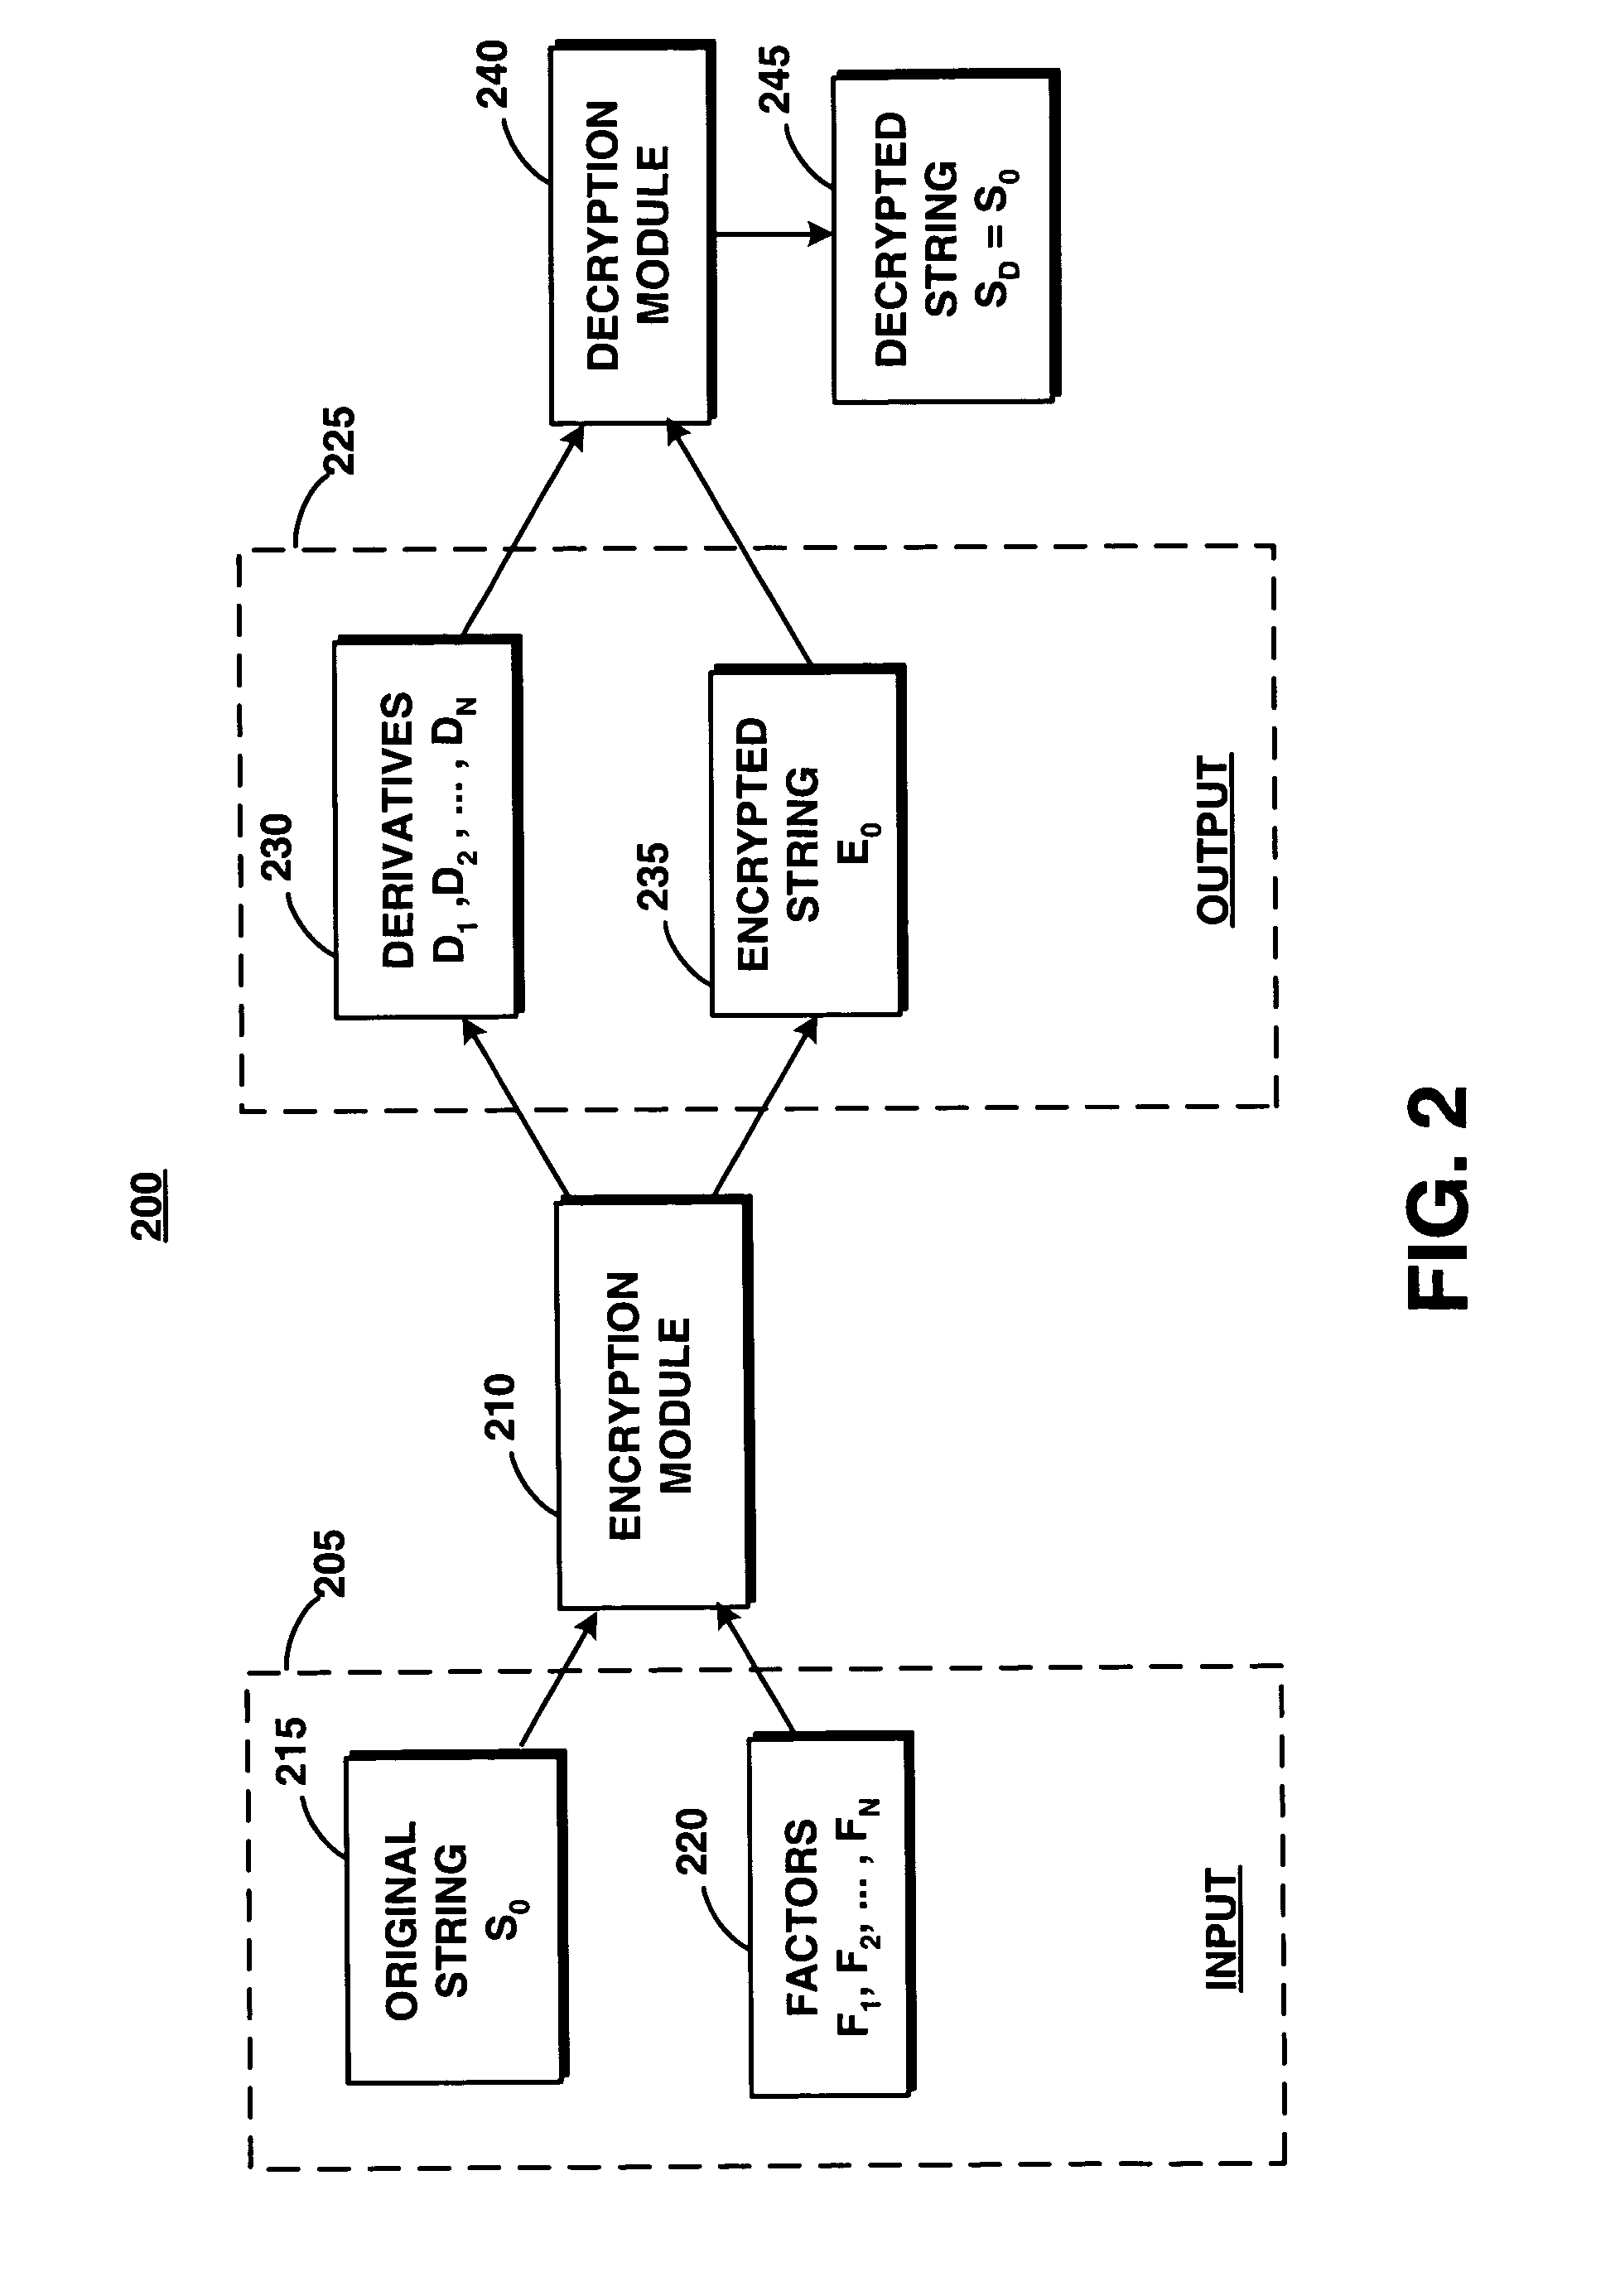 System and method for encrypting and decrypting data using derivative equations and factors